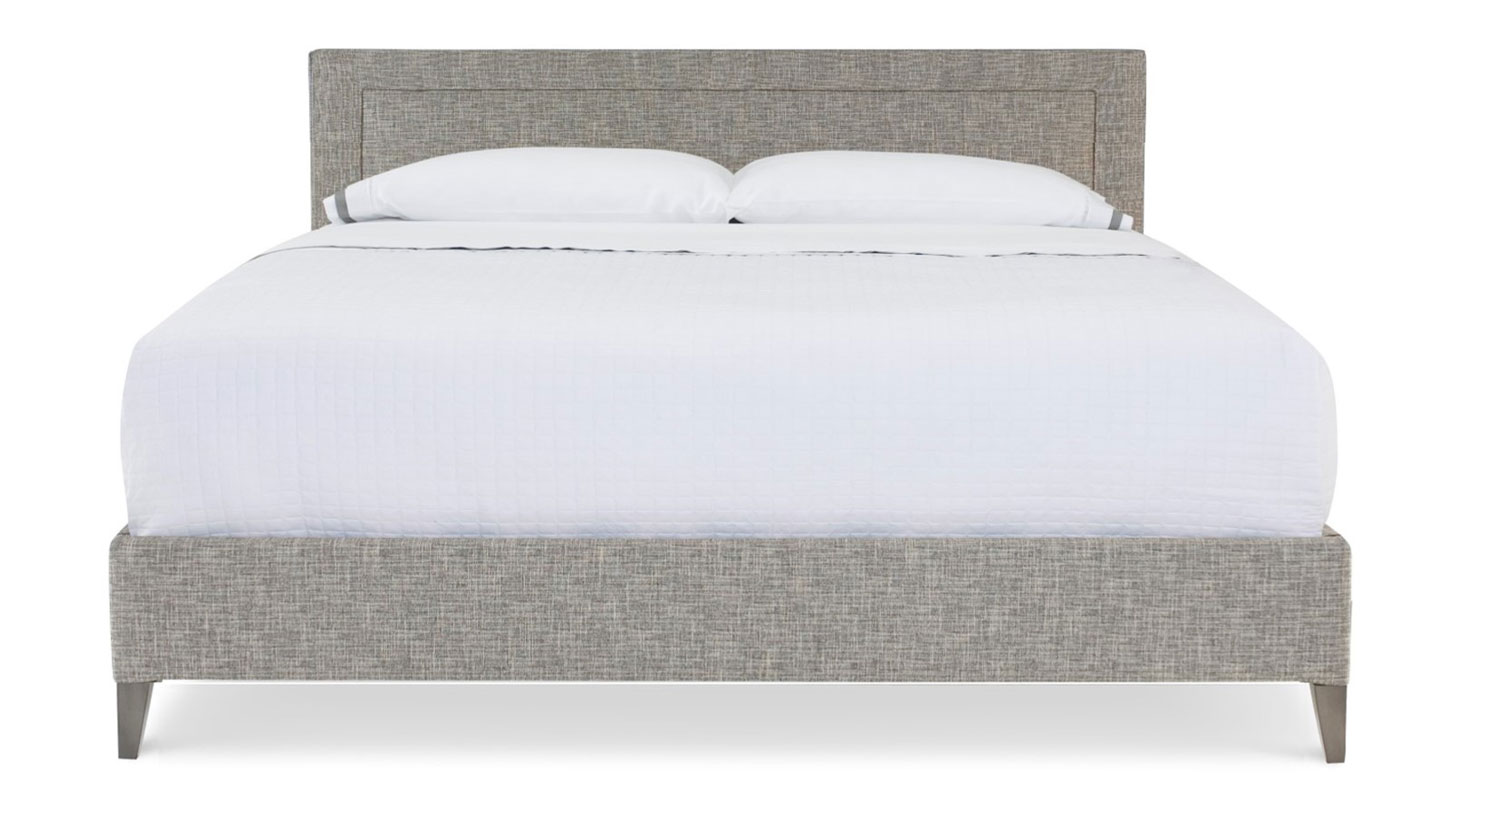 Wesley Hall 198 Phanes Bed with 46 inch headboard 